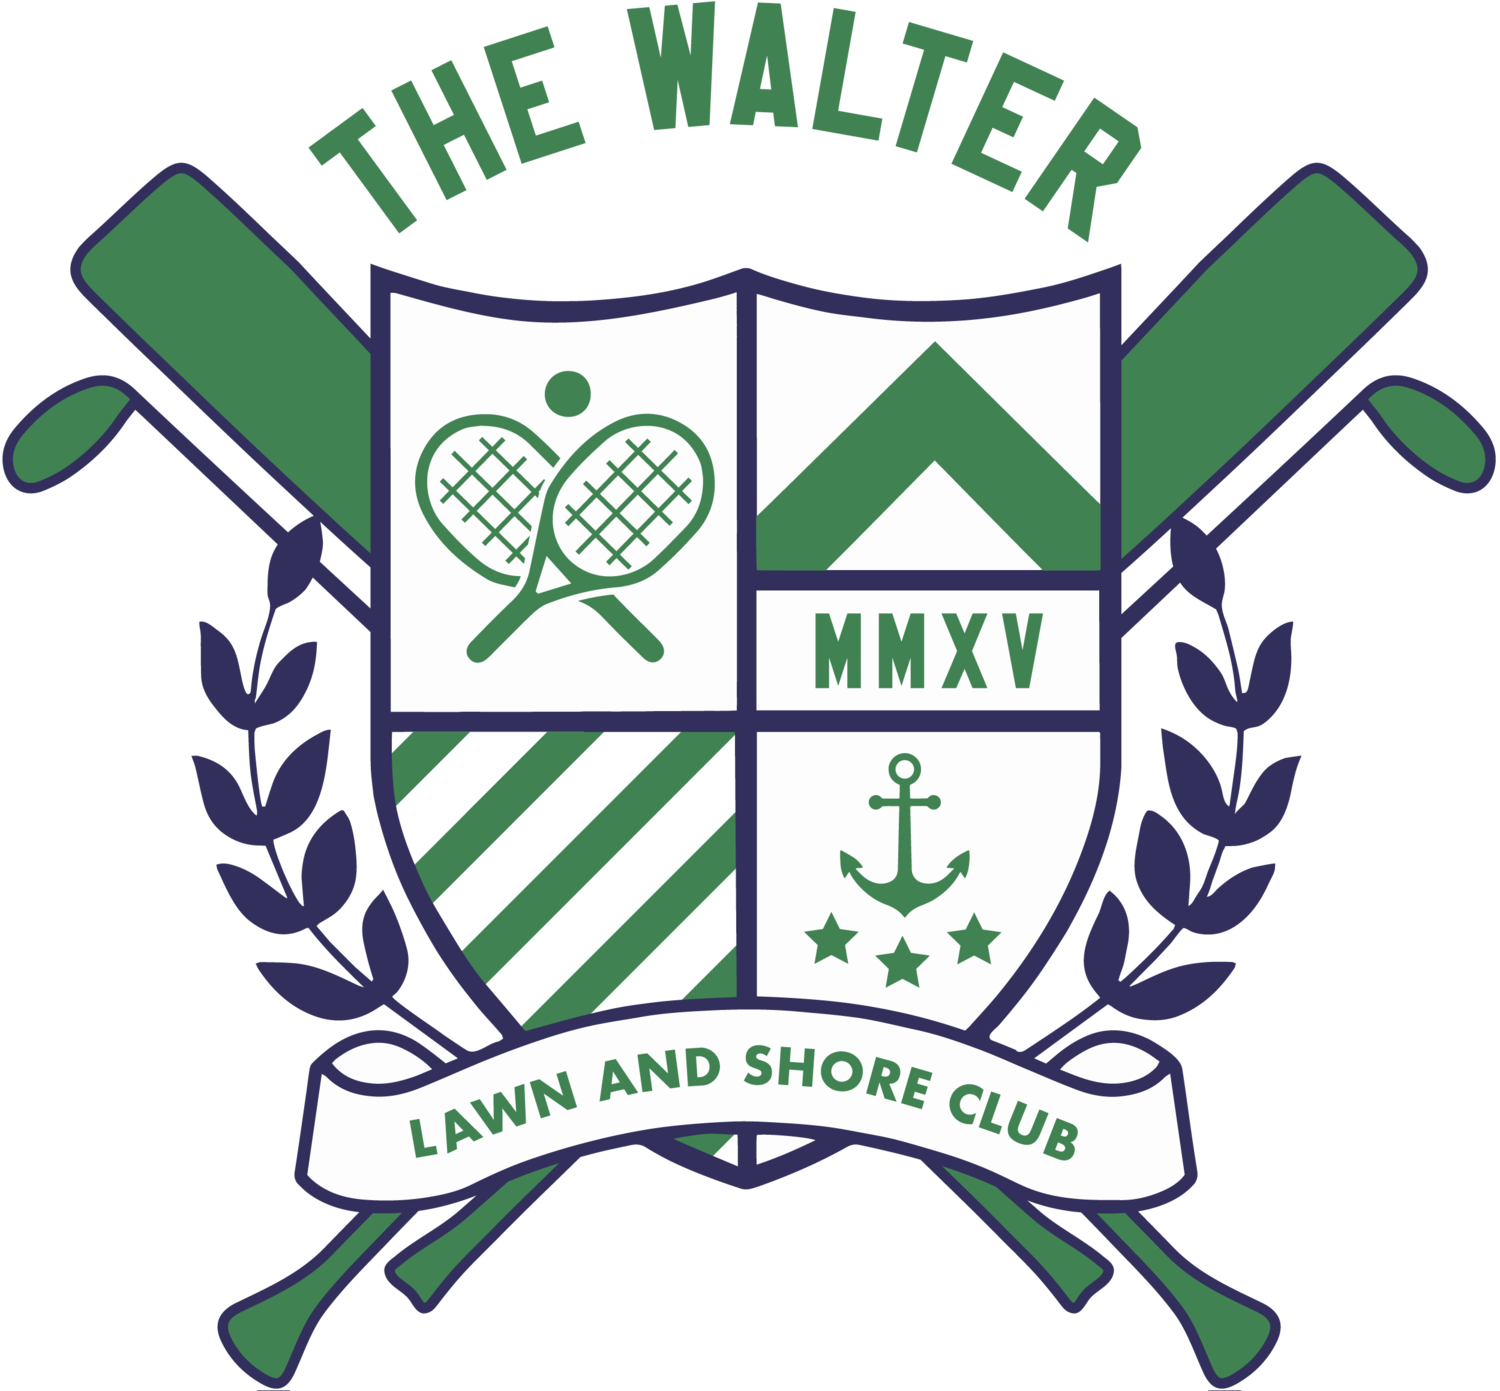 The Walter Lawn and Shore Club